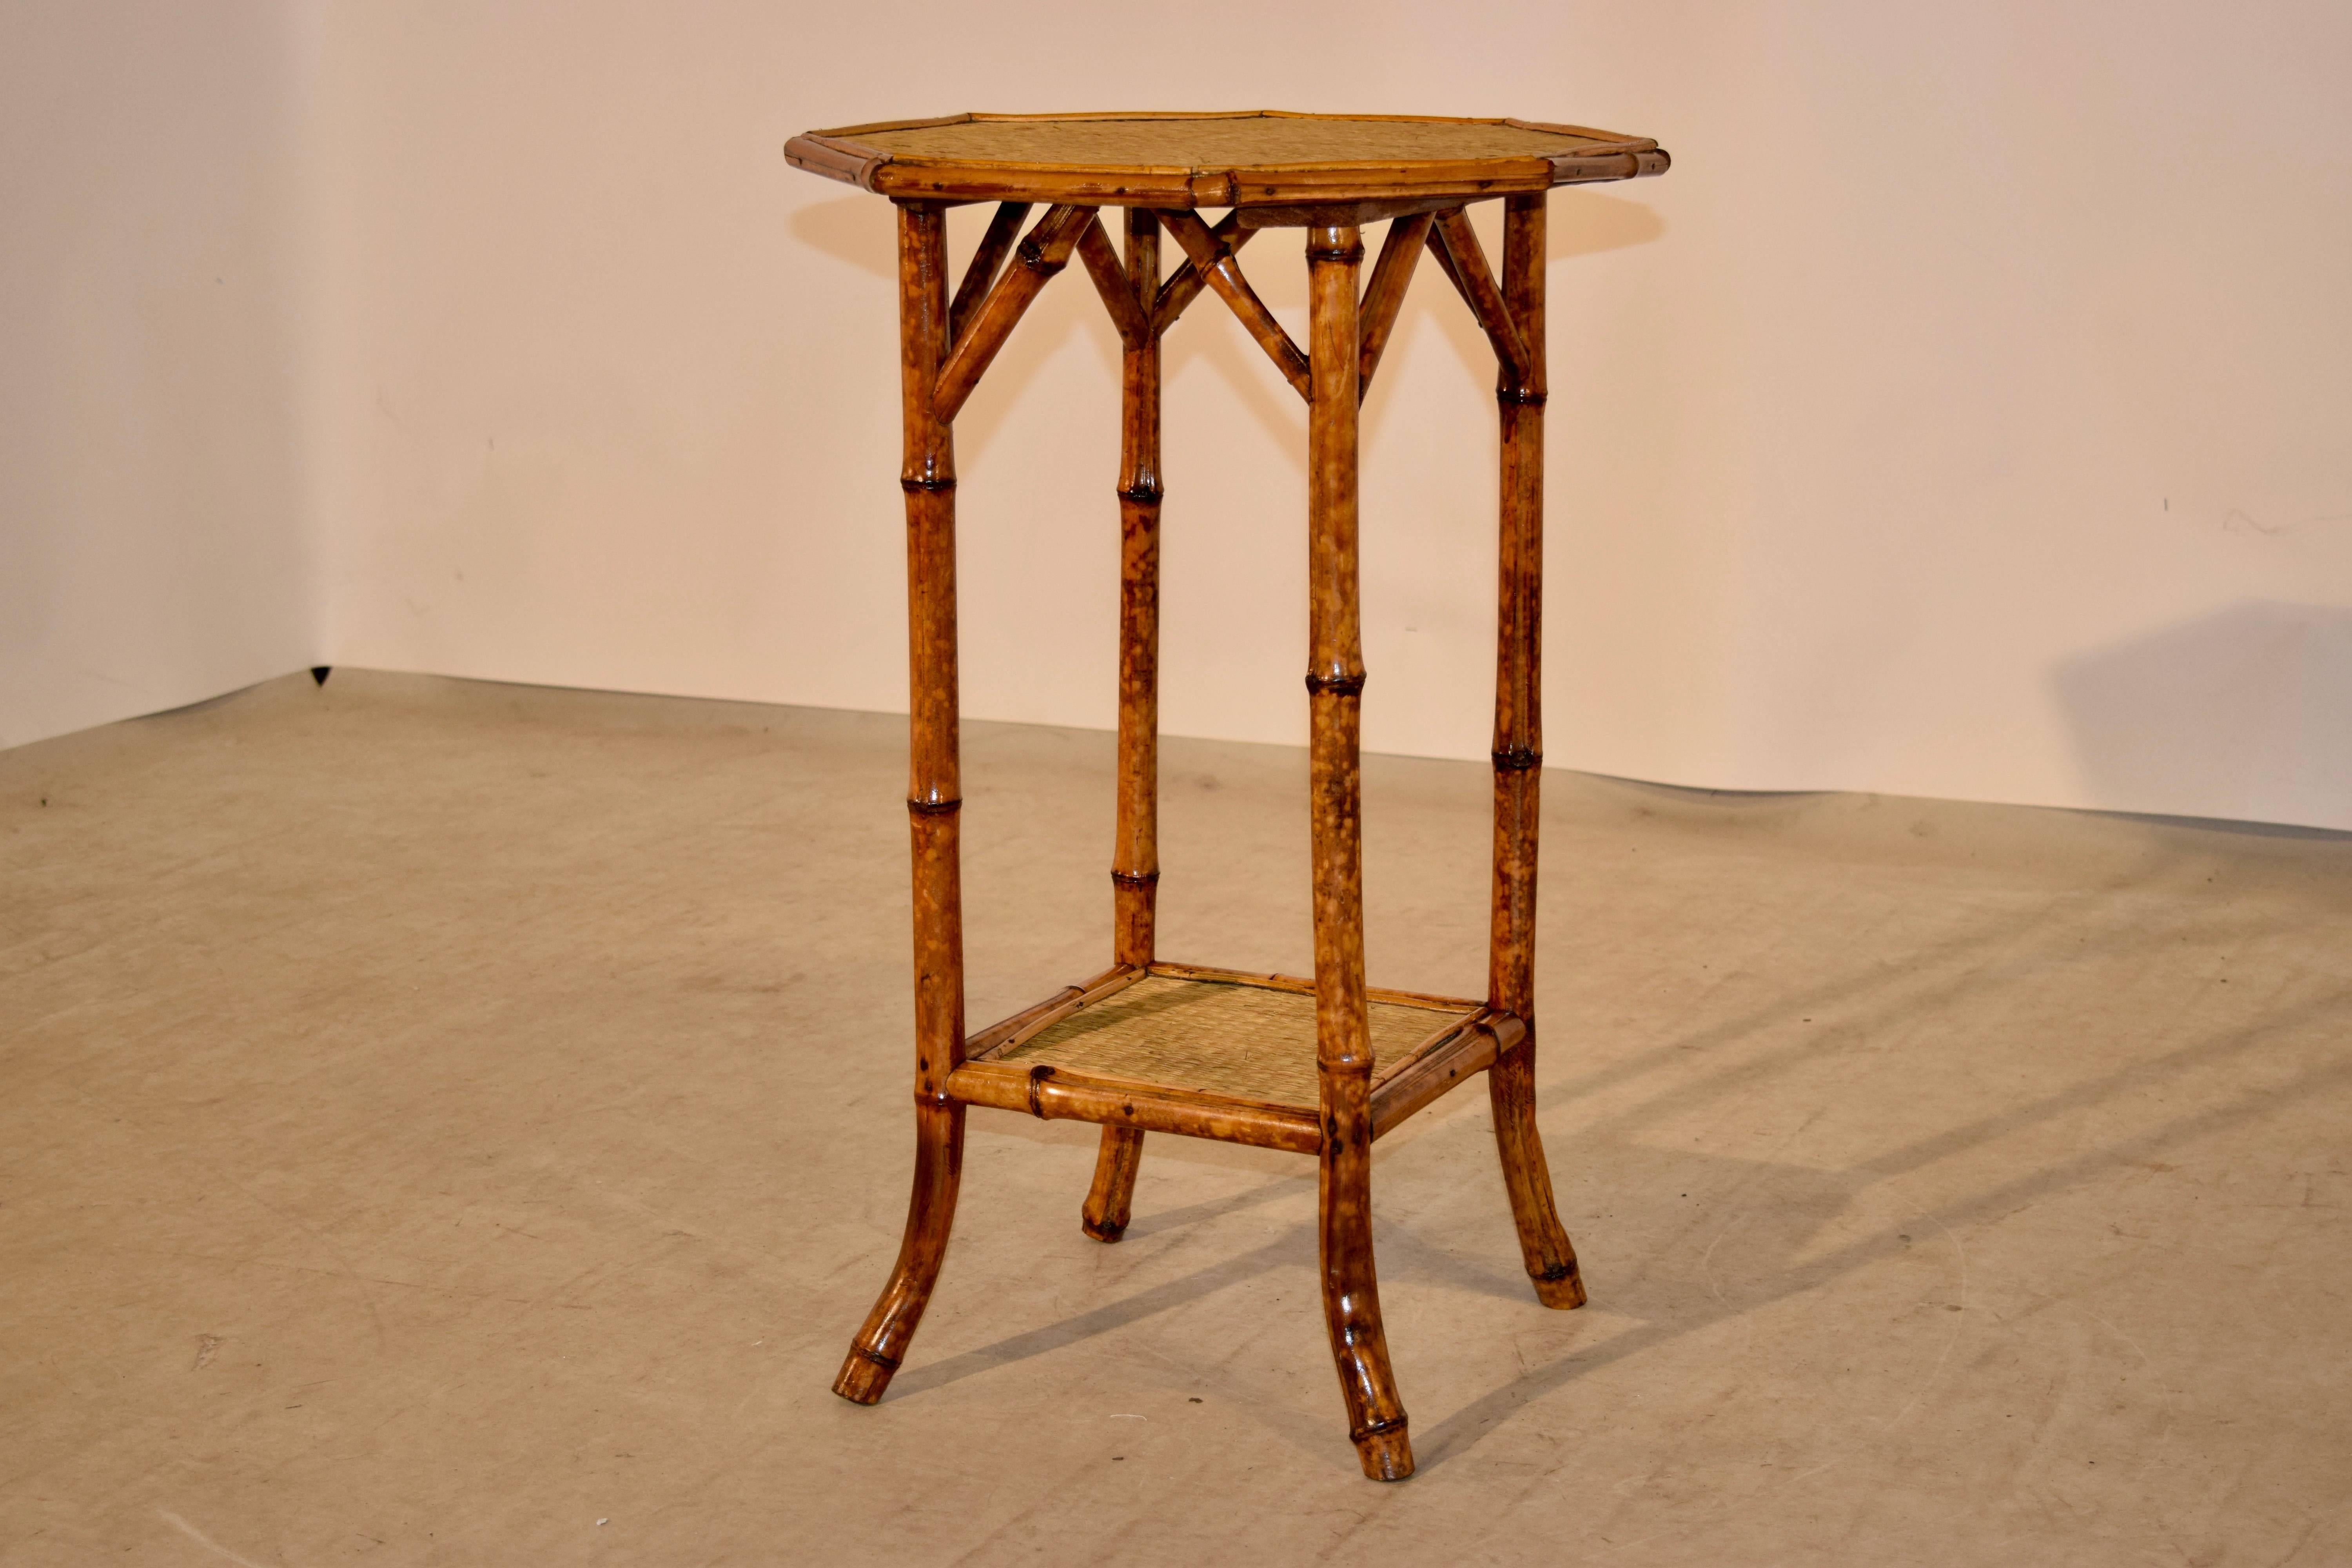 19th century French tortoise bamboo side table with an octagonal shaped top covered in rush with beaded molding around the edge. The splayed legs are joined by a lower shelf which is also covered in rush.